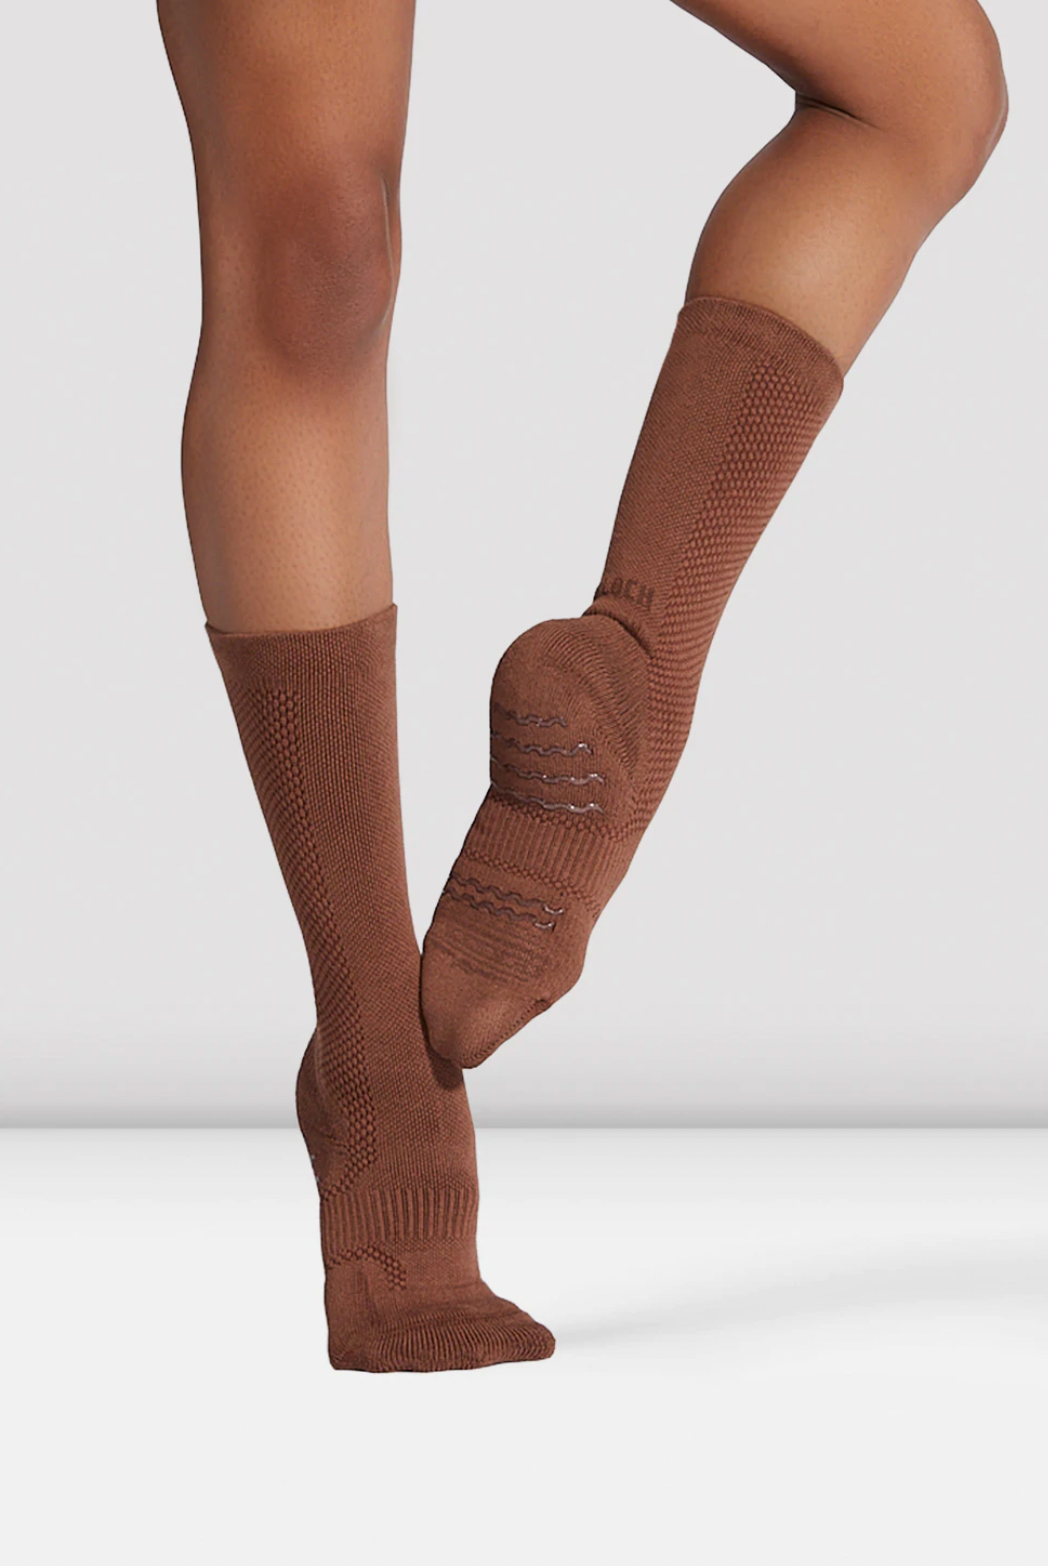 blochsox dance socks in brown cocoa from the collective dancewear